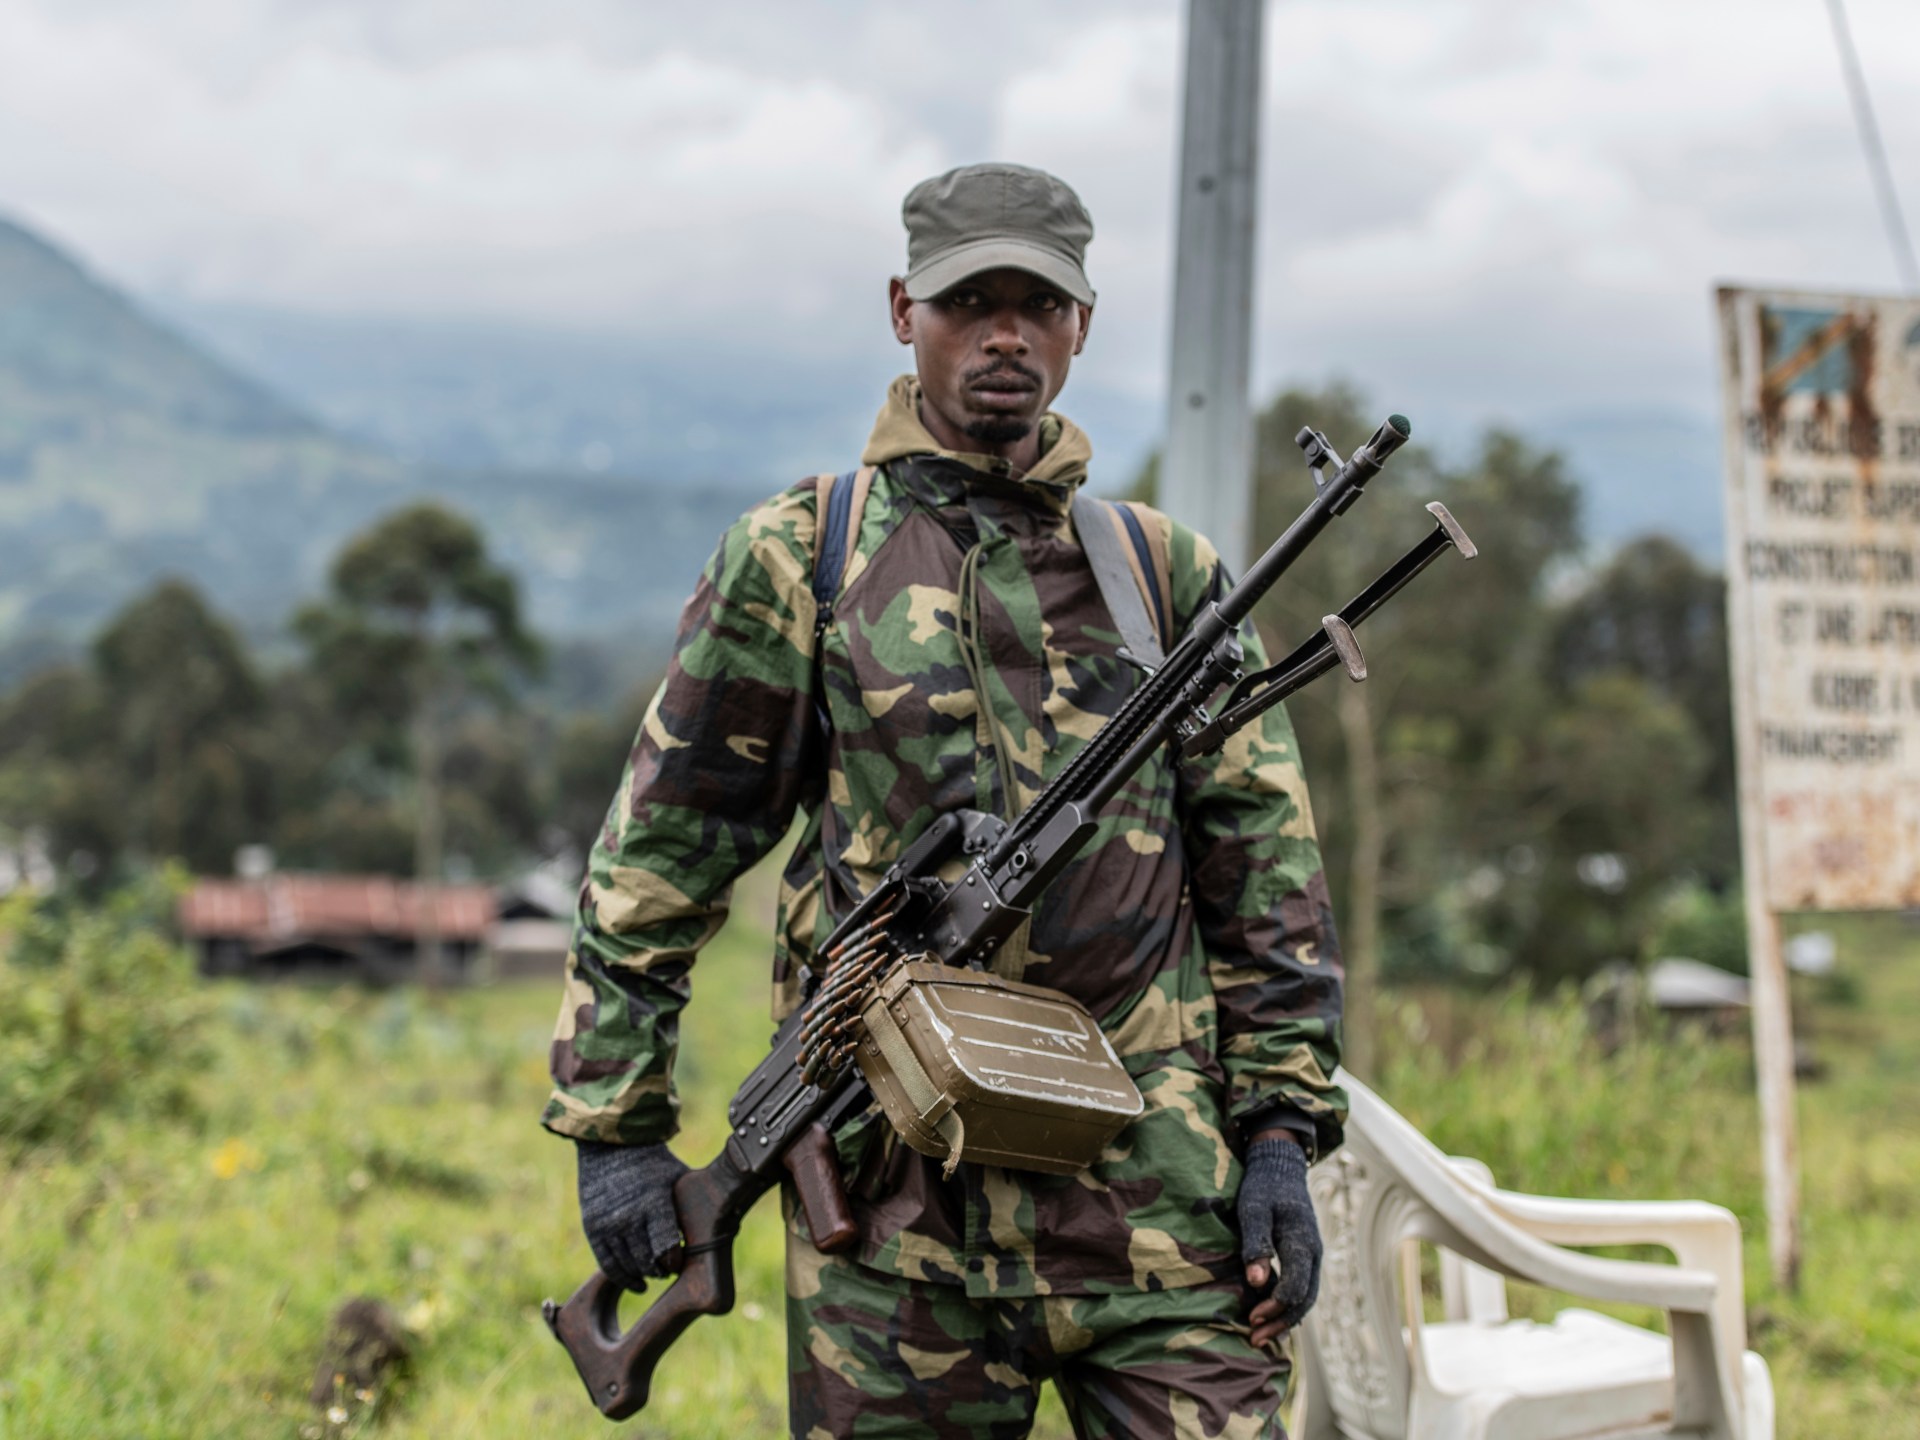 DRC files second complaint to ICC against Rwanda army, M23 rebels | Paul Kagame News